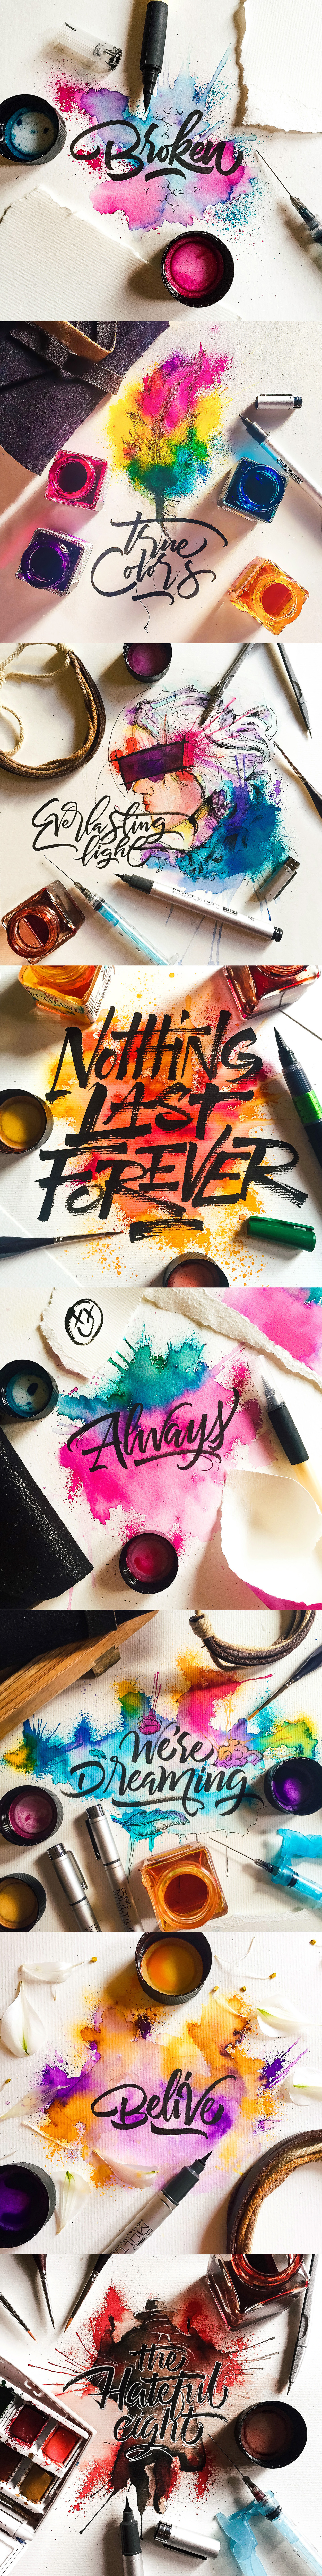 #Watercolor #music #quotes #movie #colorfull  #ecoline #lettering #splash #colors